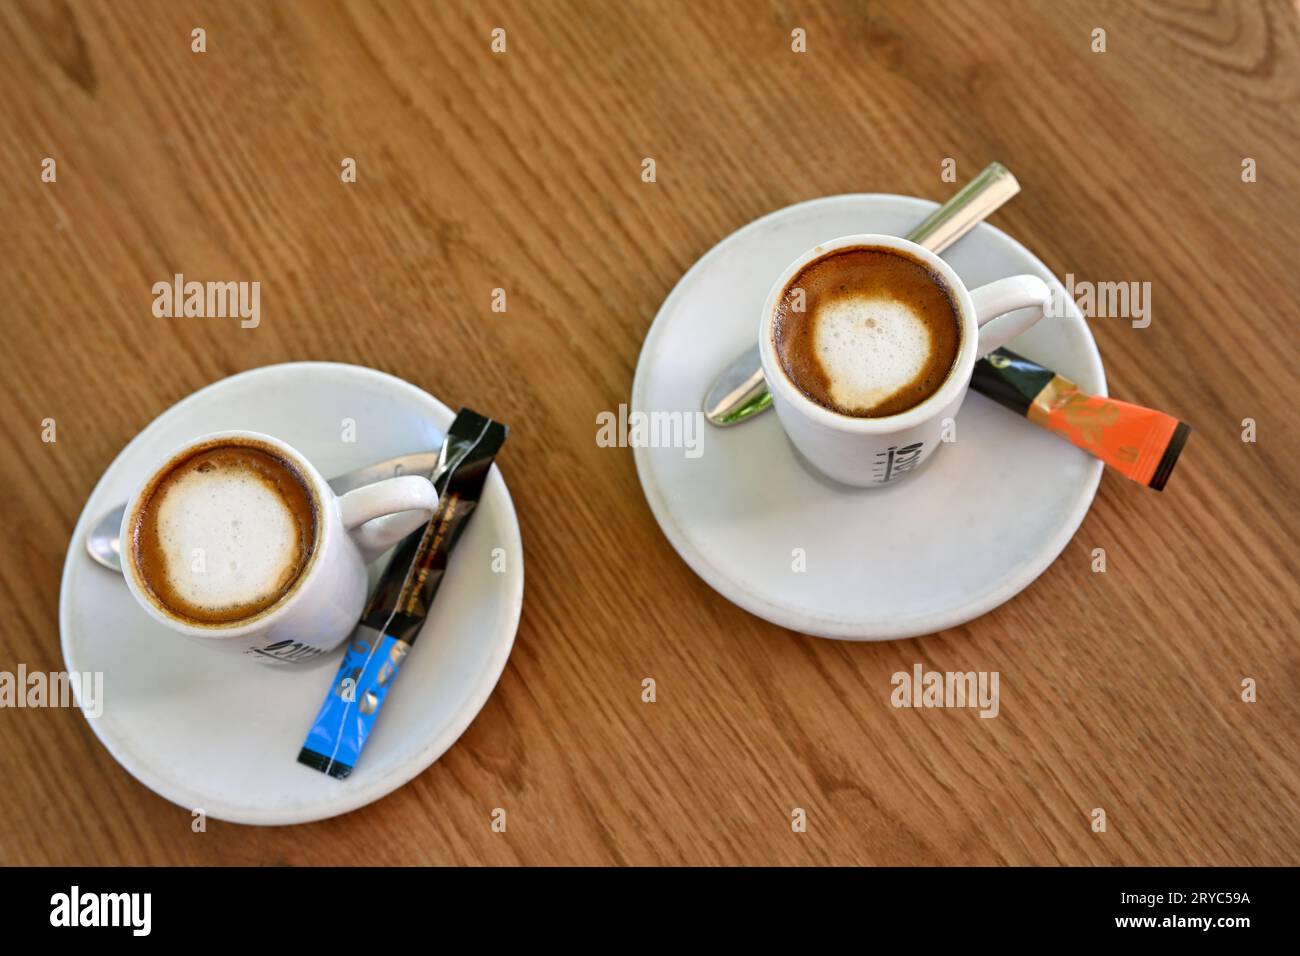 Two cups of coffee with packs of sugar on saucer, wooden table top Stock Photo